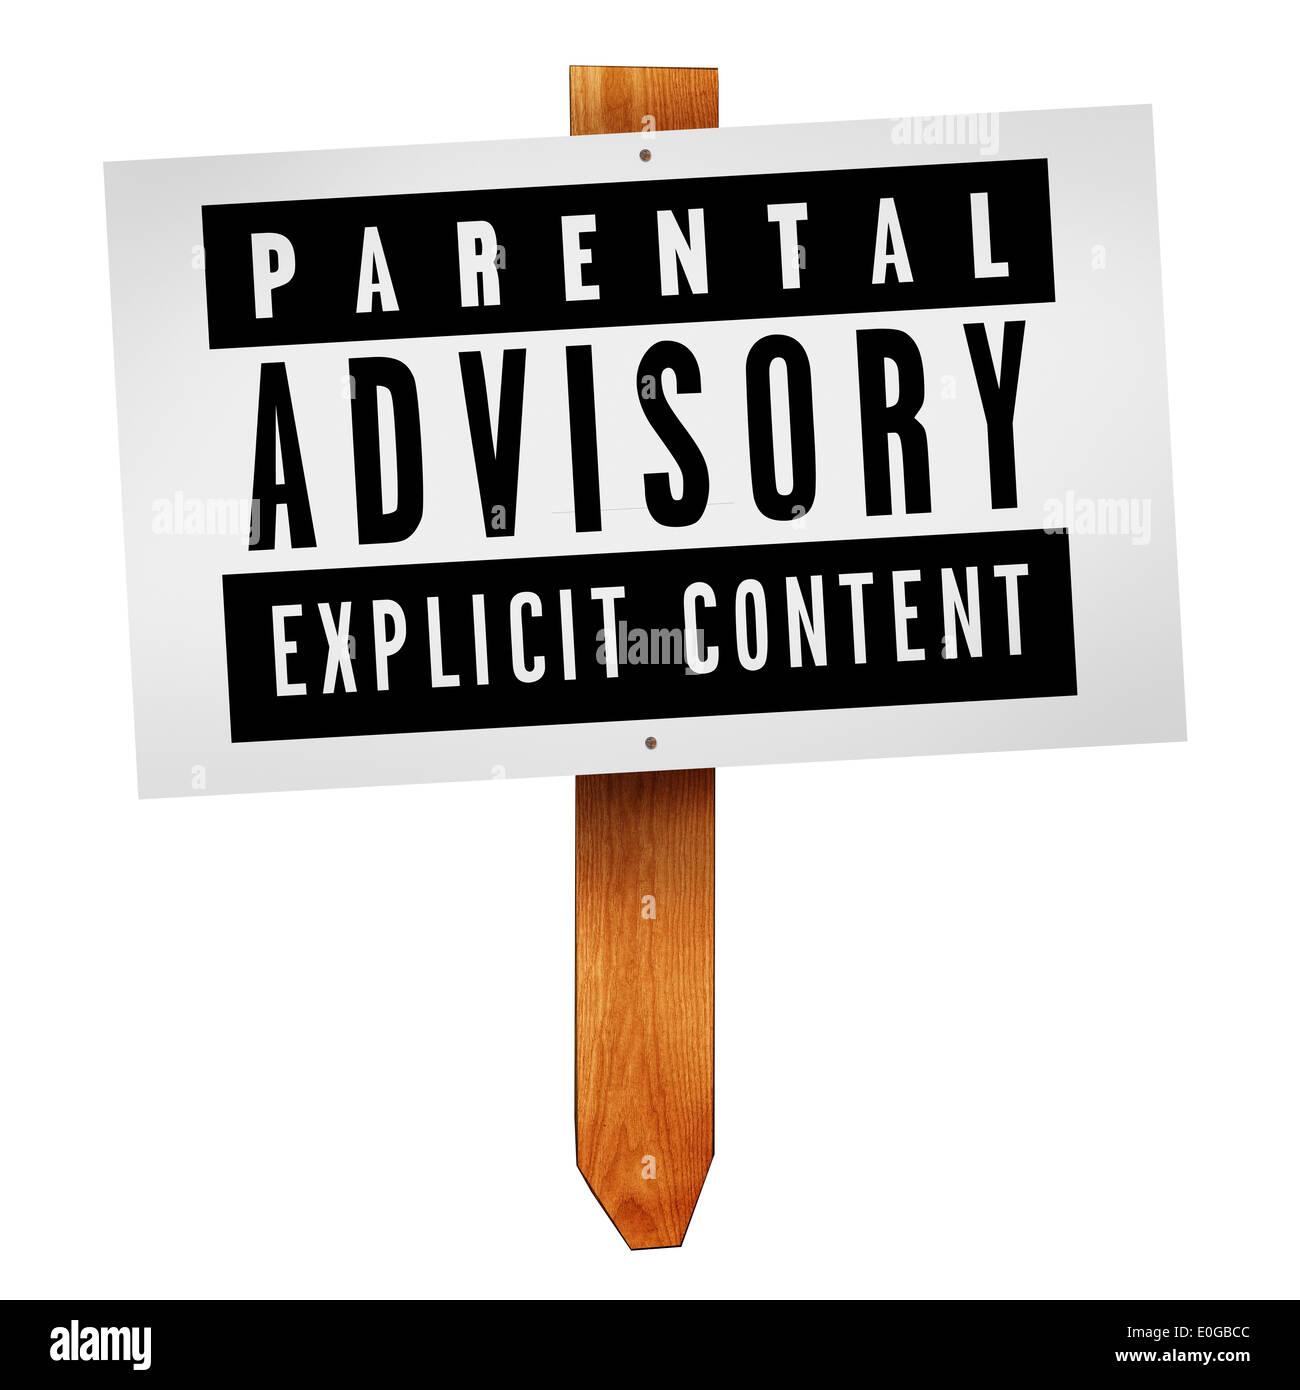 Parental advisory label on wooden post as a sign isolated on white background Stock Photo